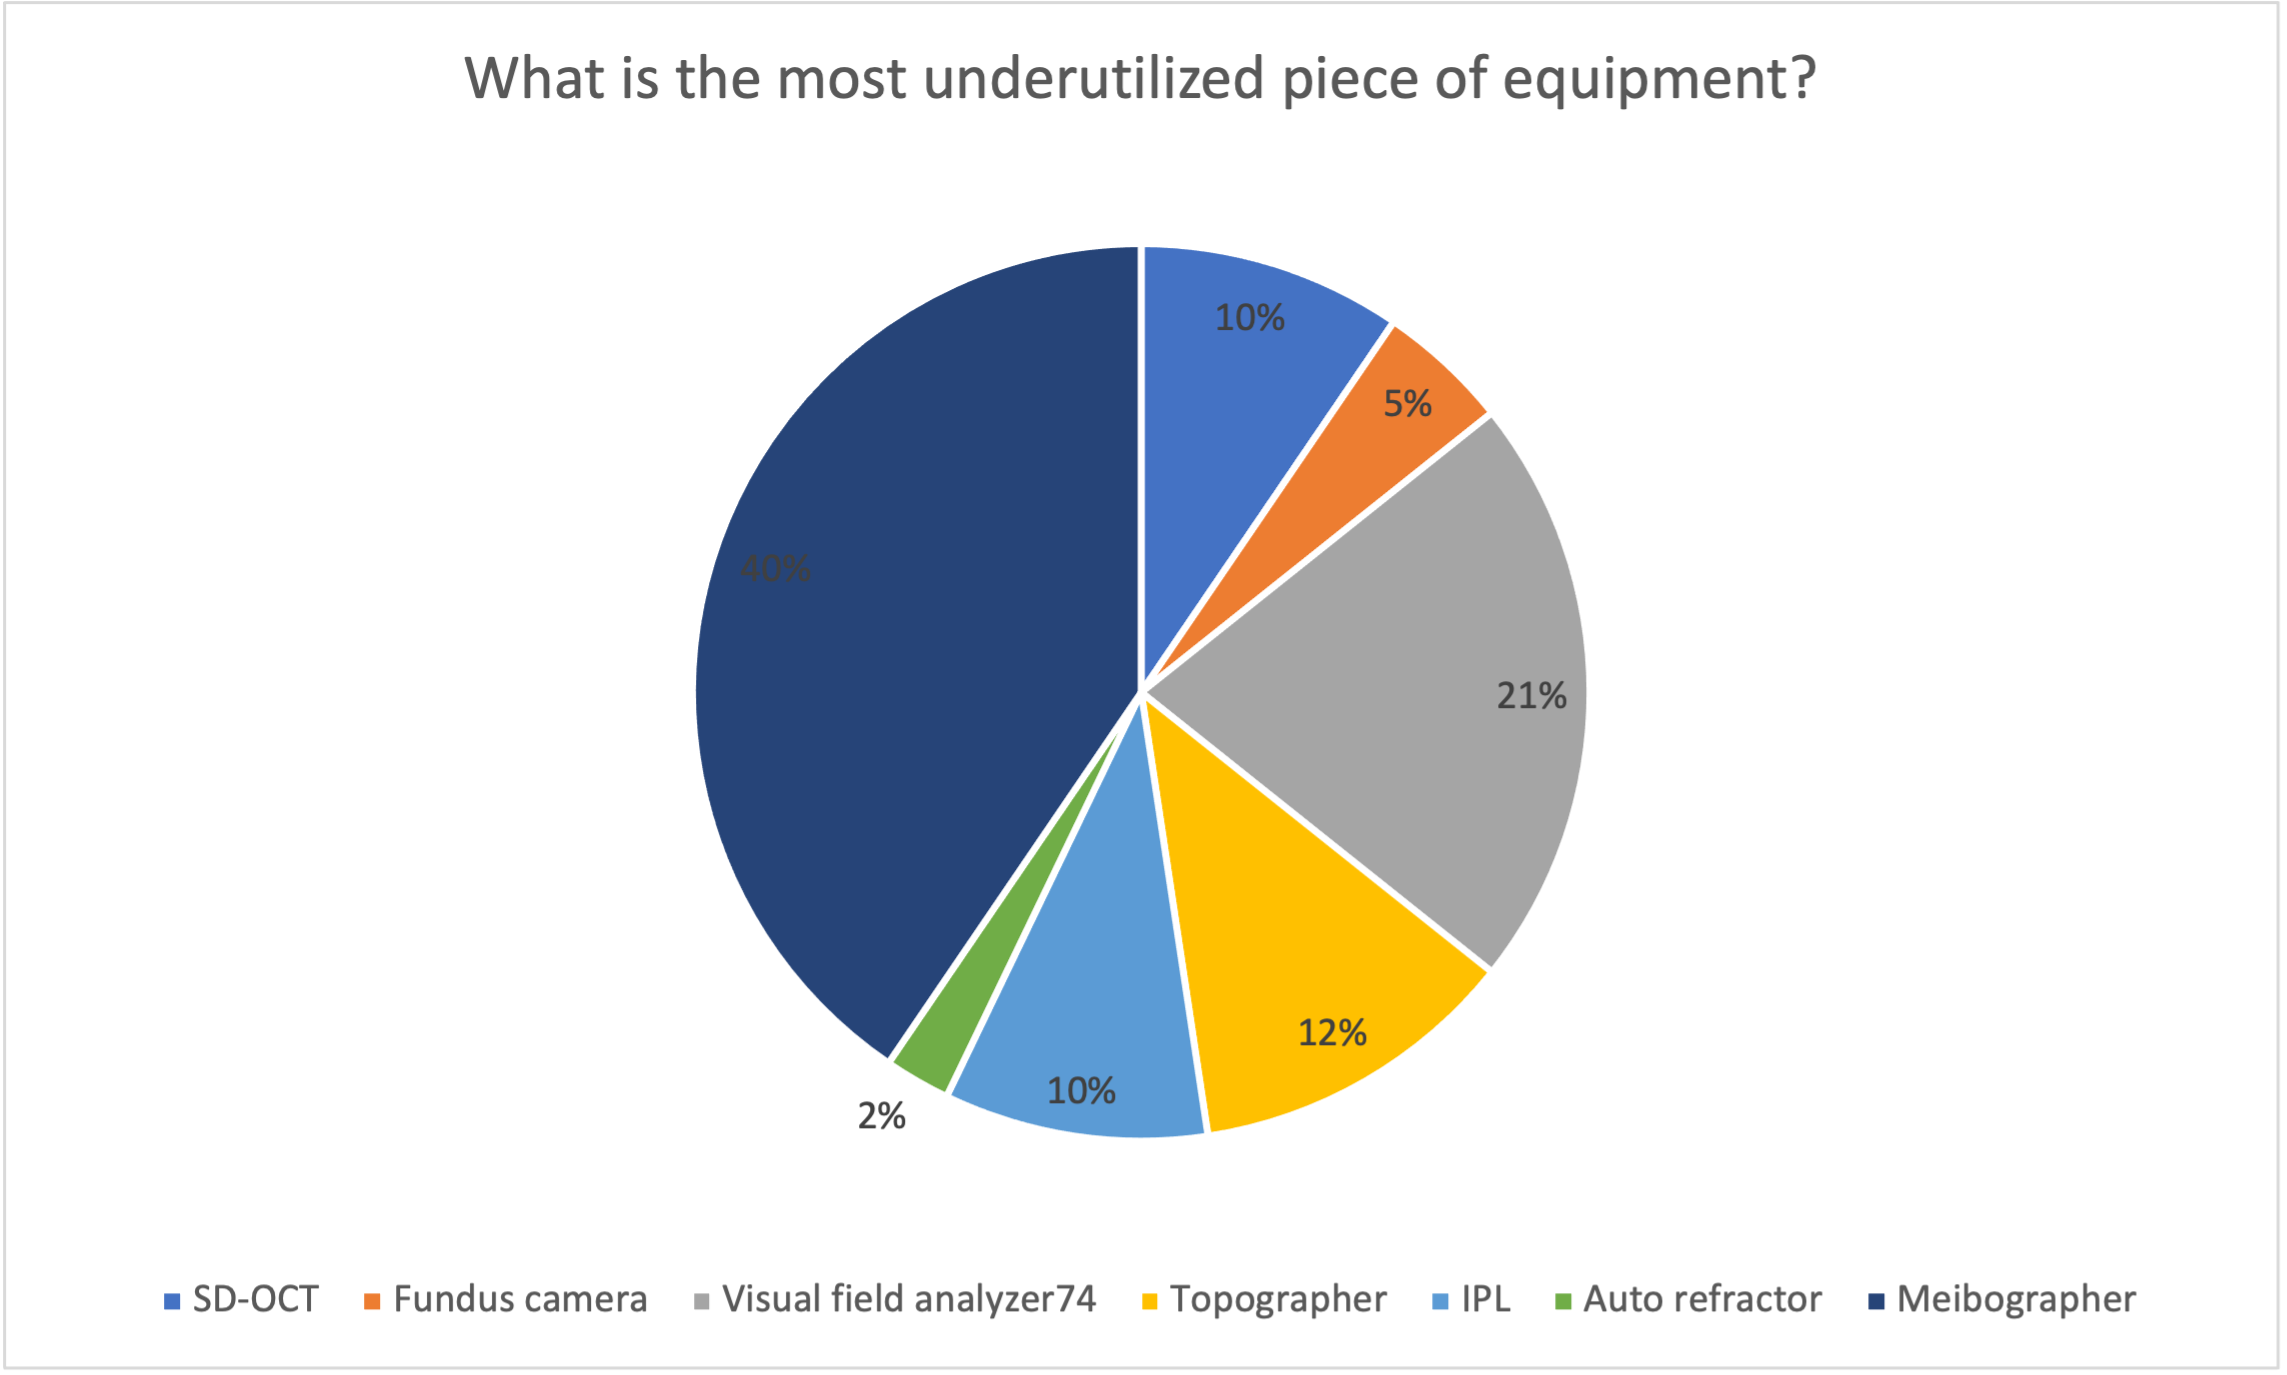 Poll Results: What is the most underutilized piece of equipment?